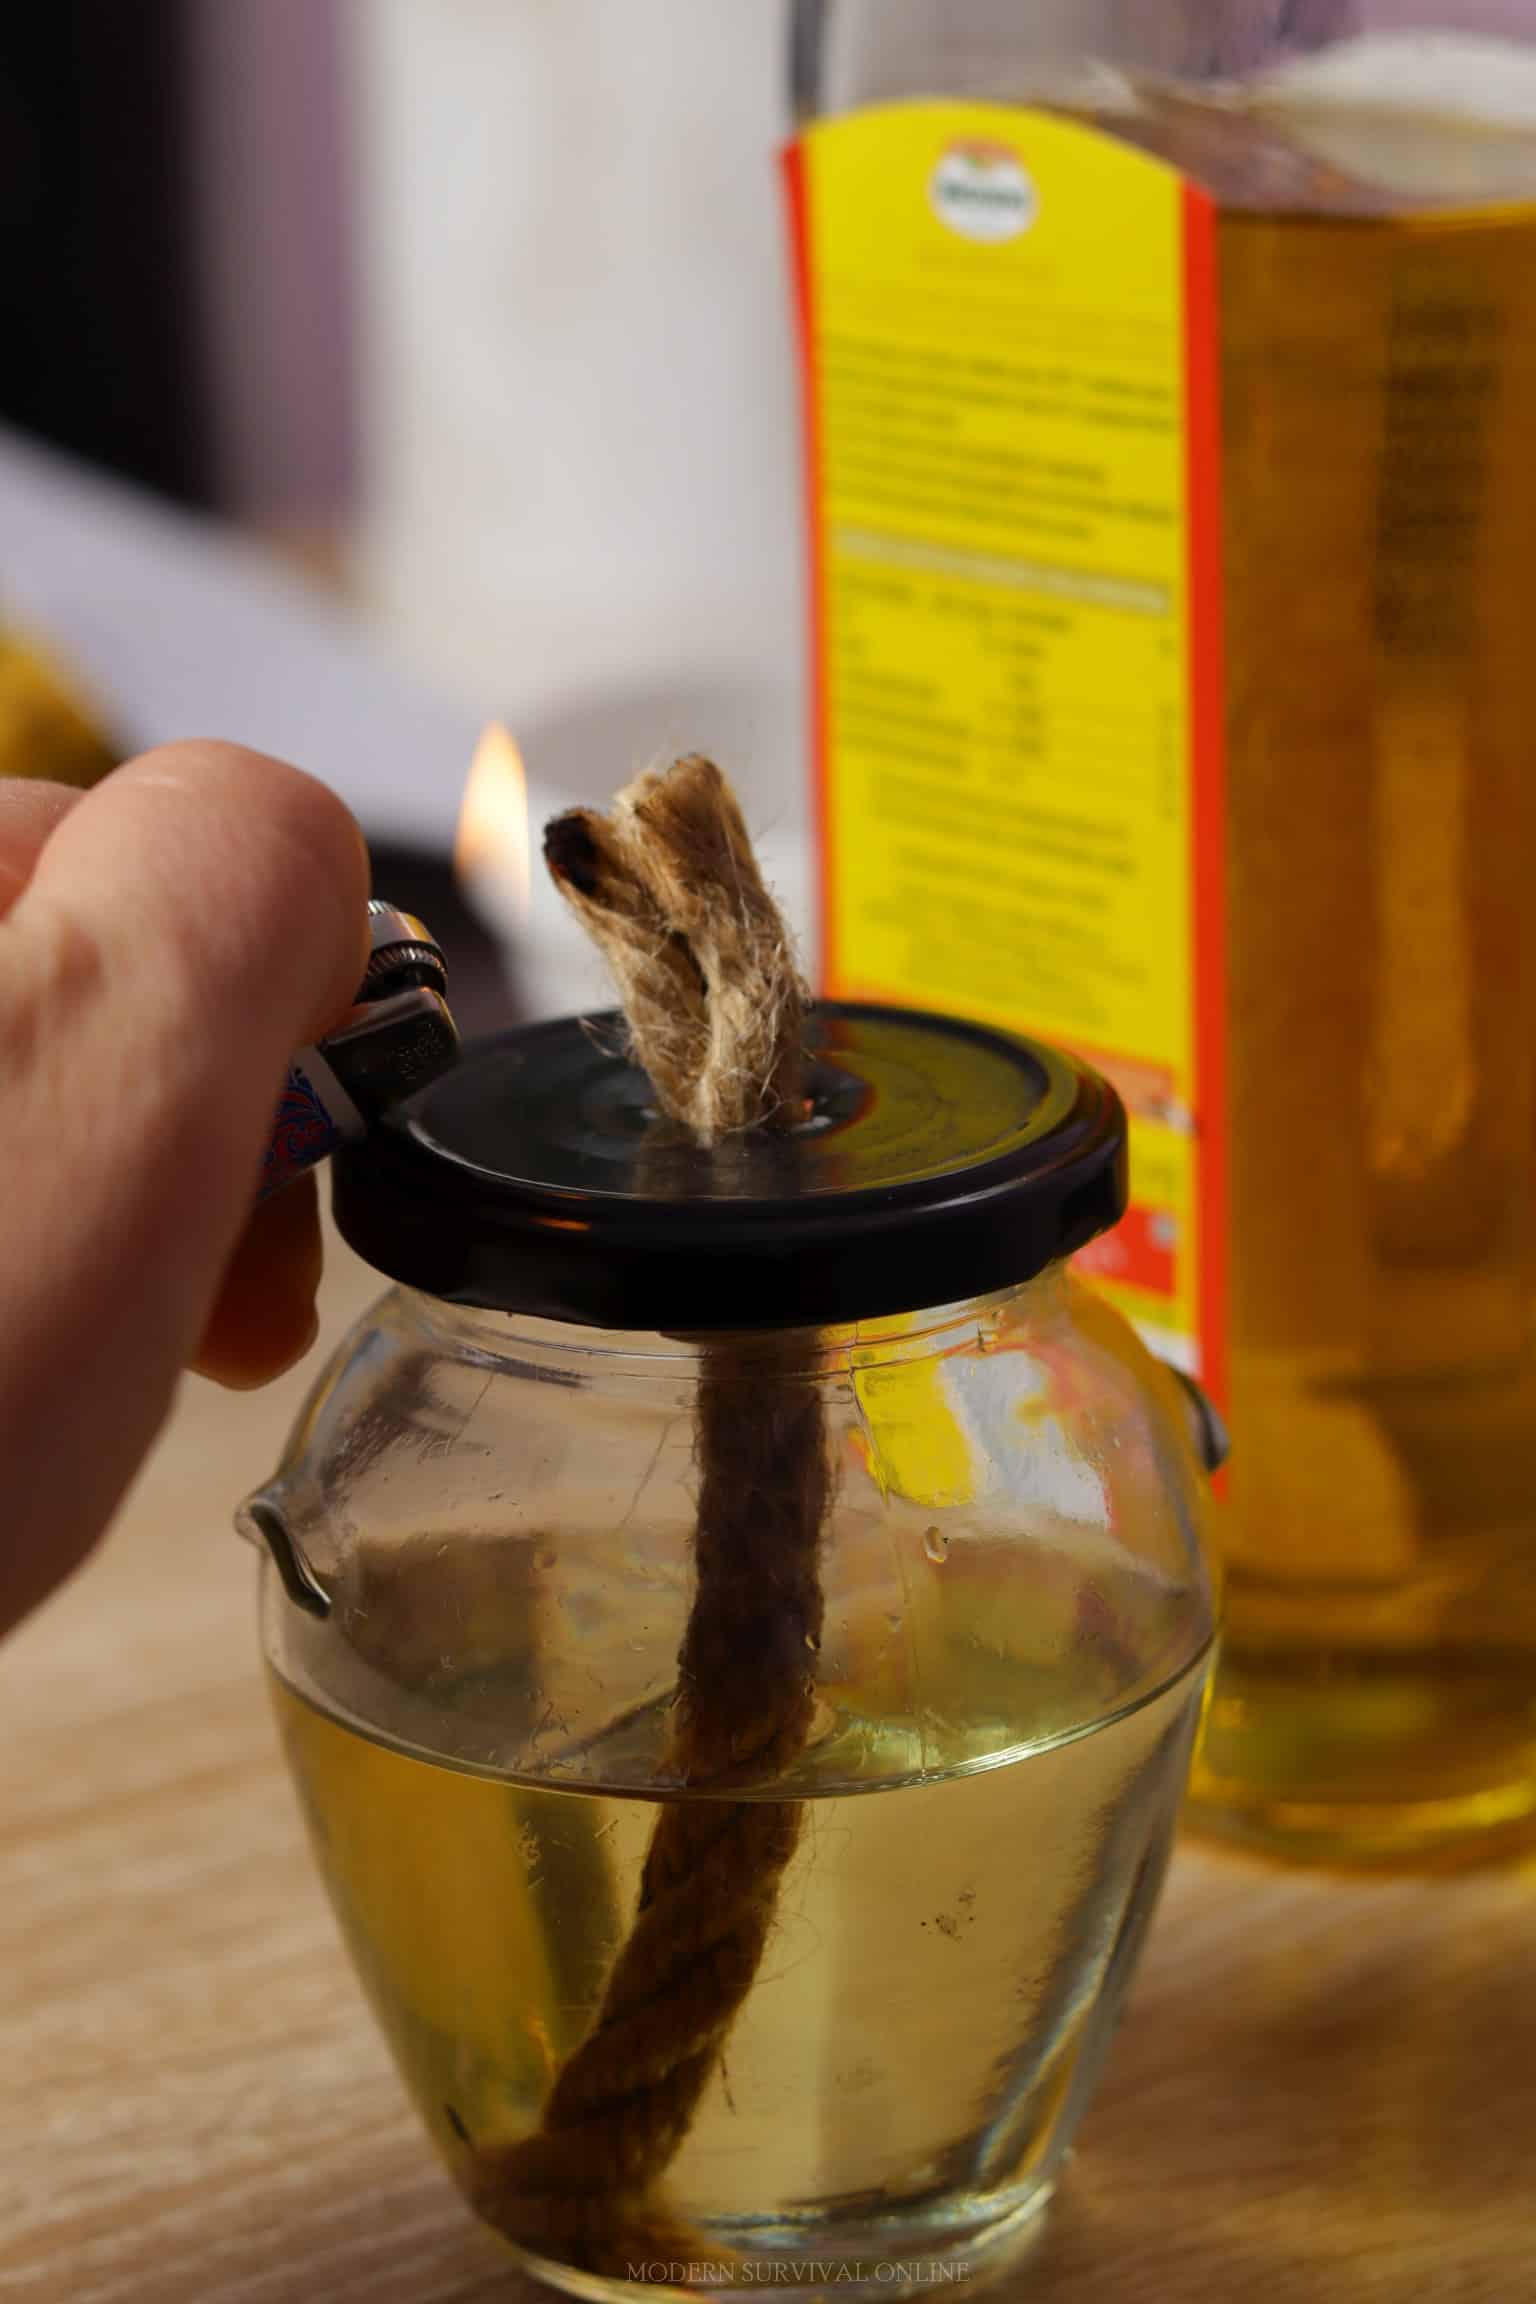 lighting a DIY lamp running on cooking oil